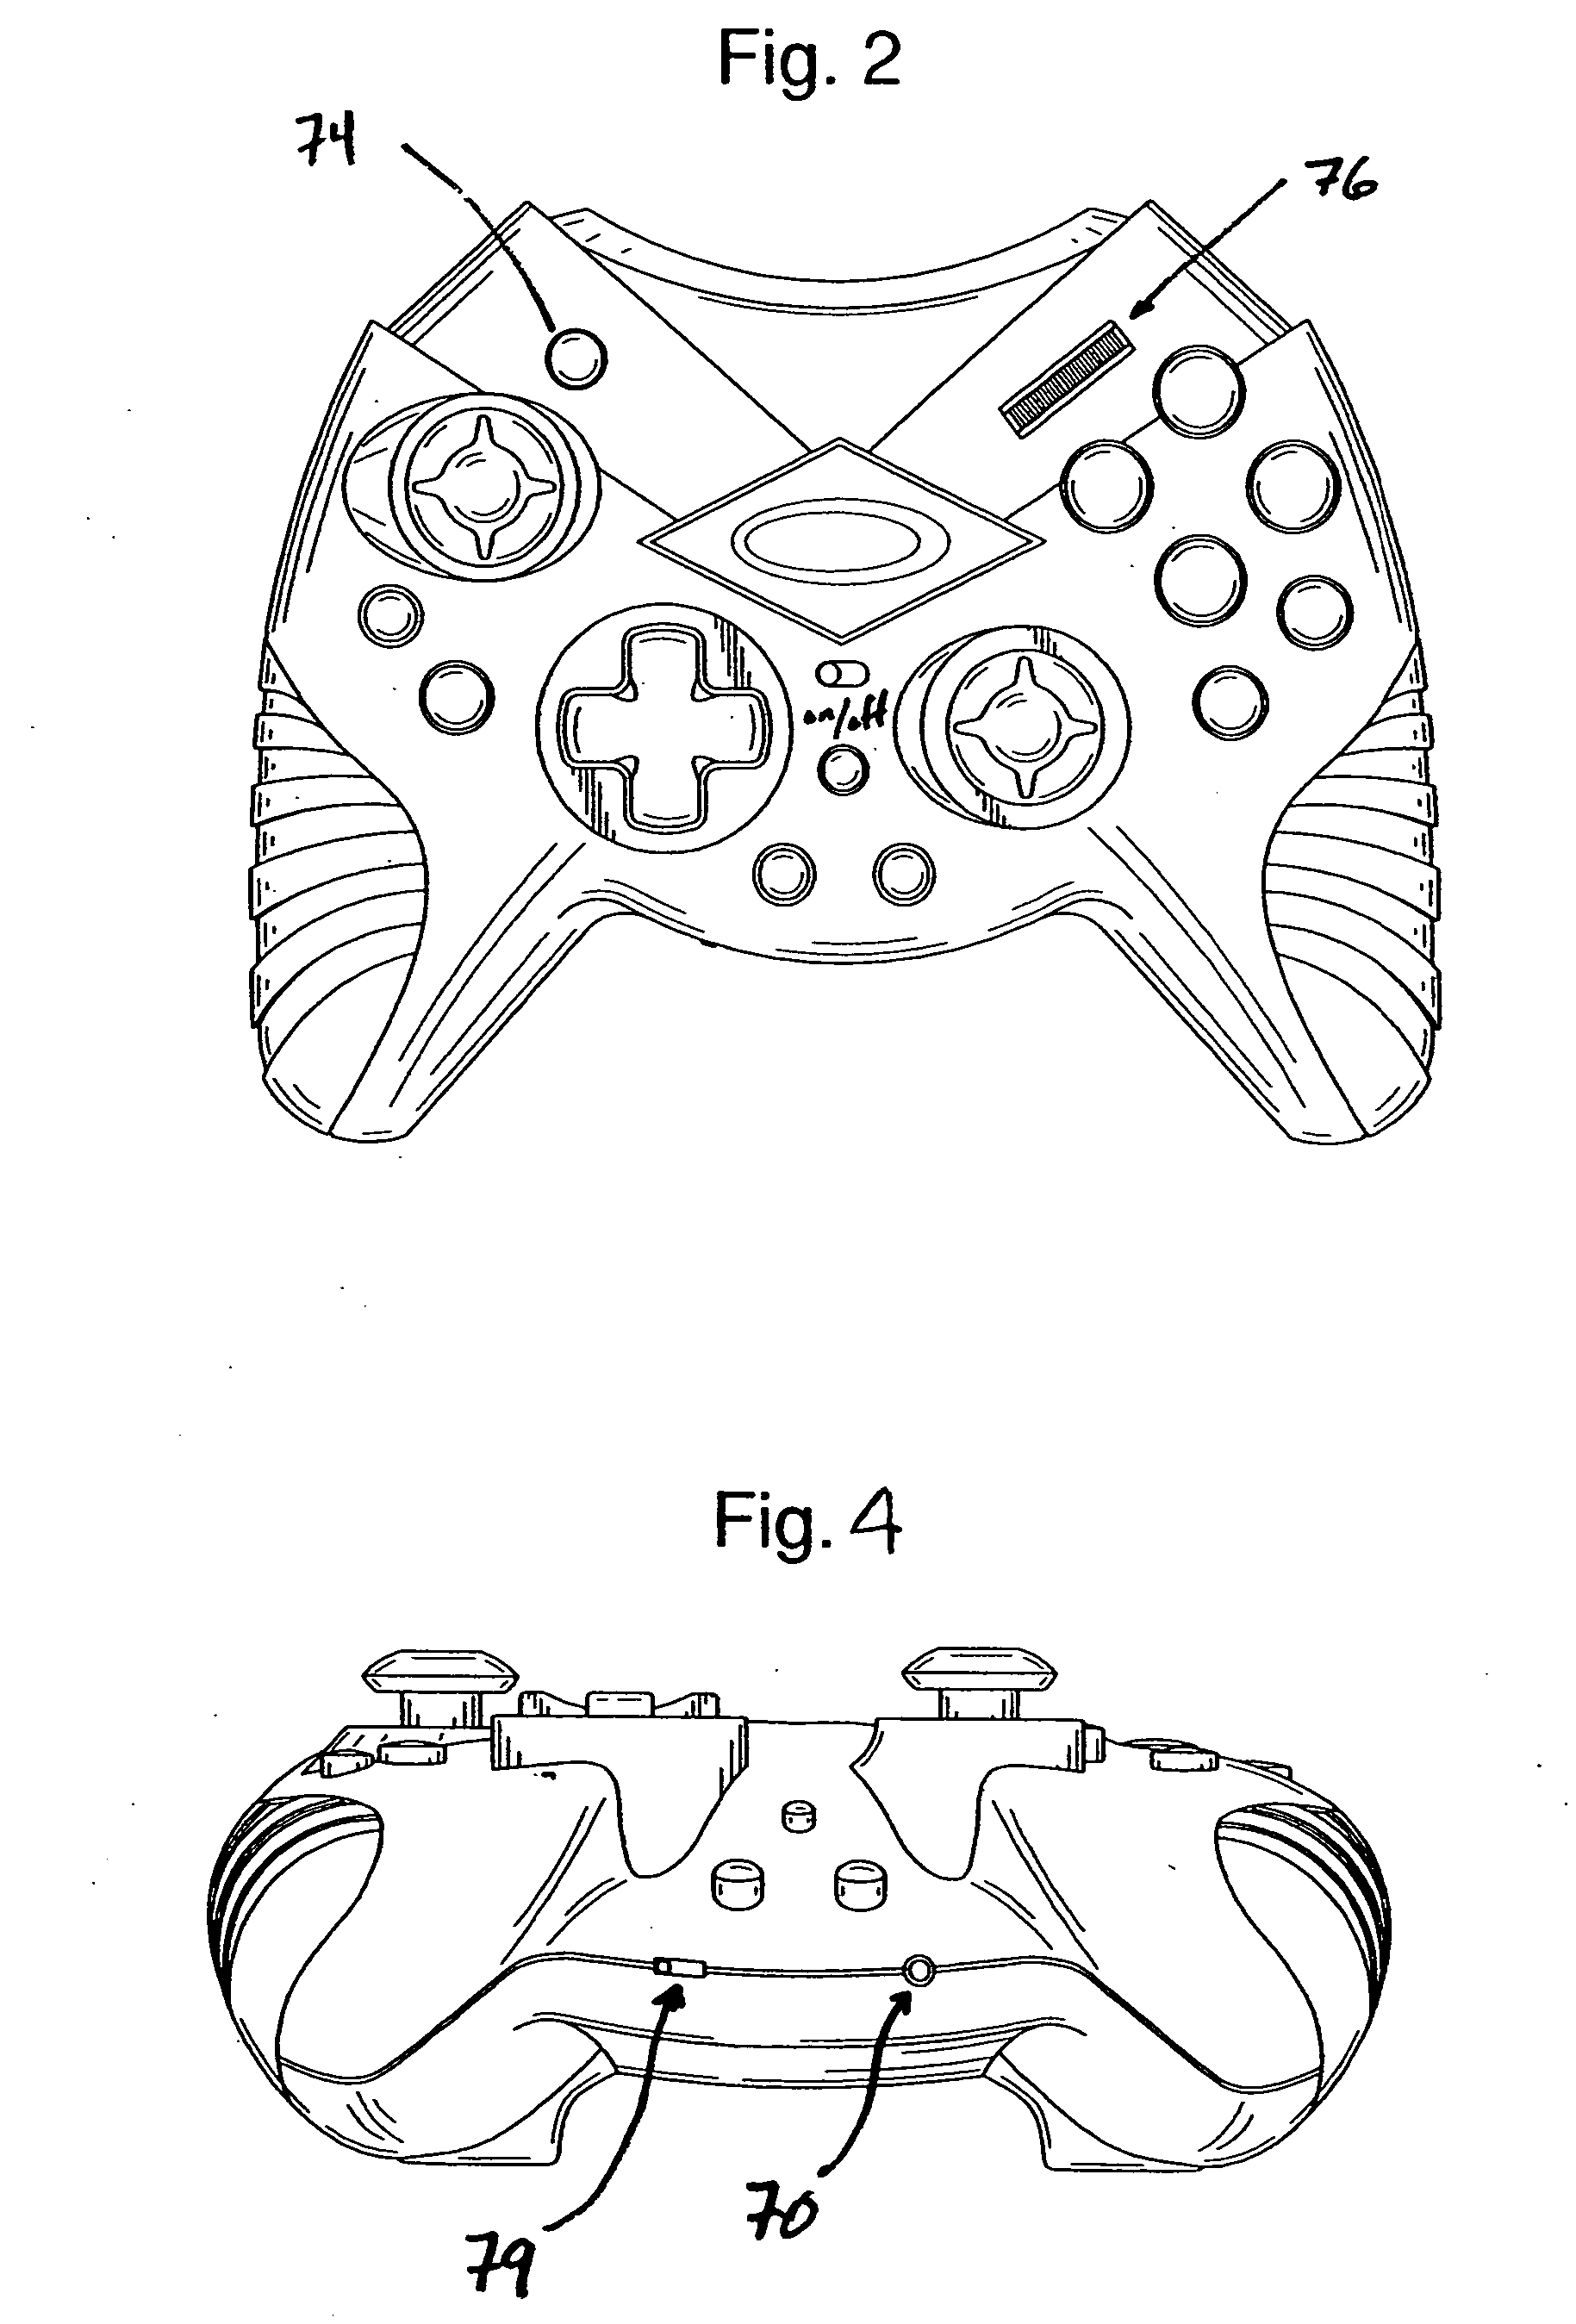 Wireless game controller with integrated audio system